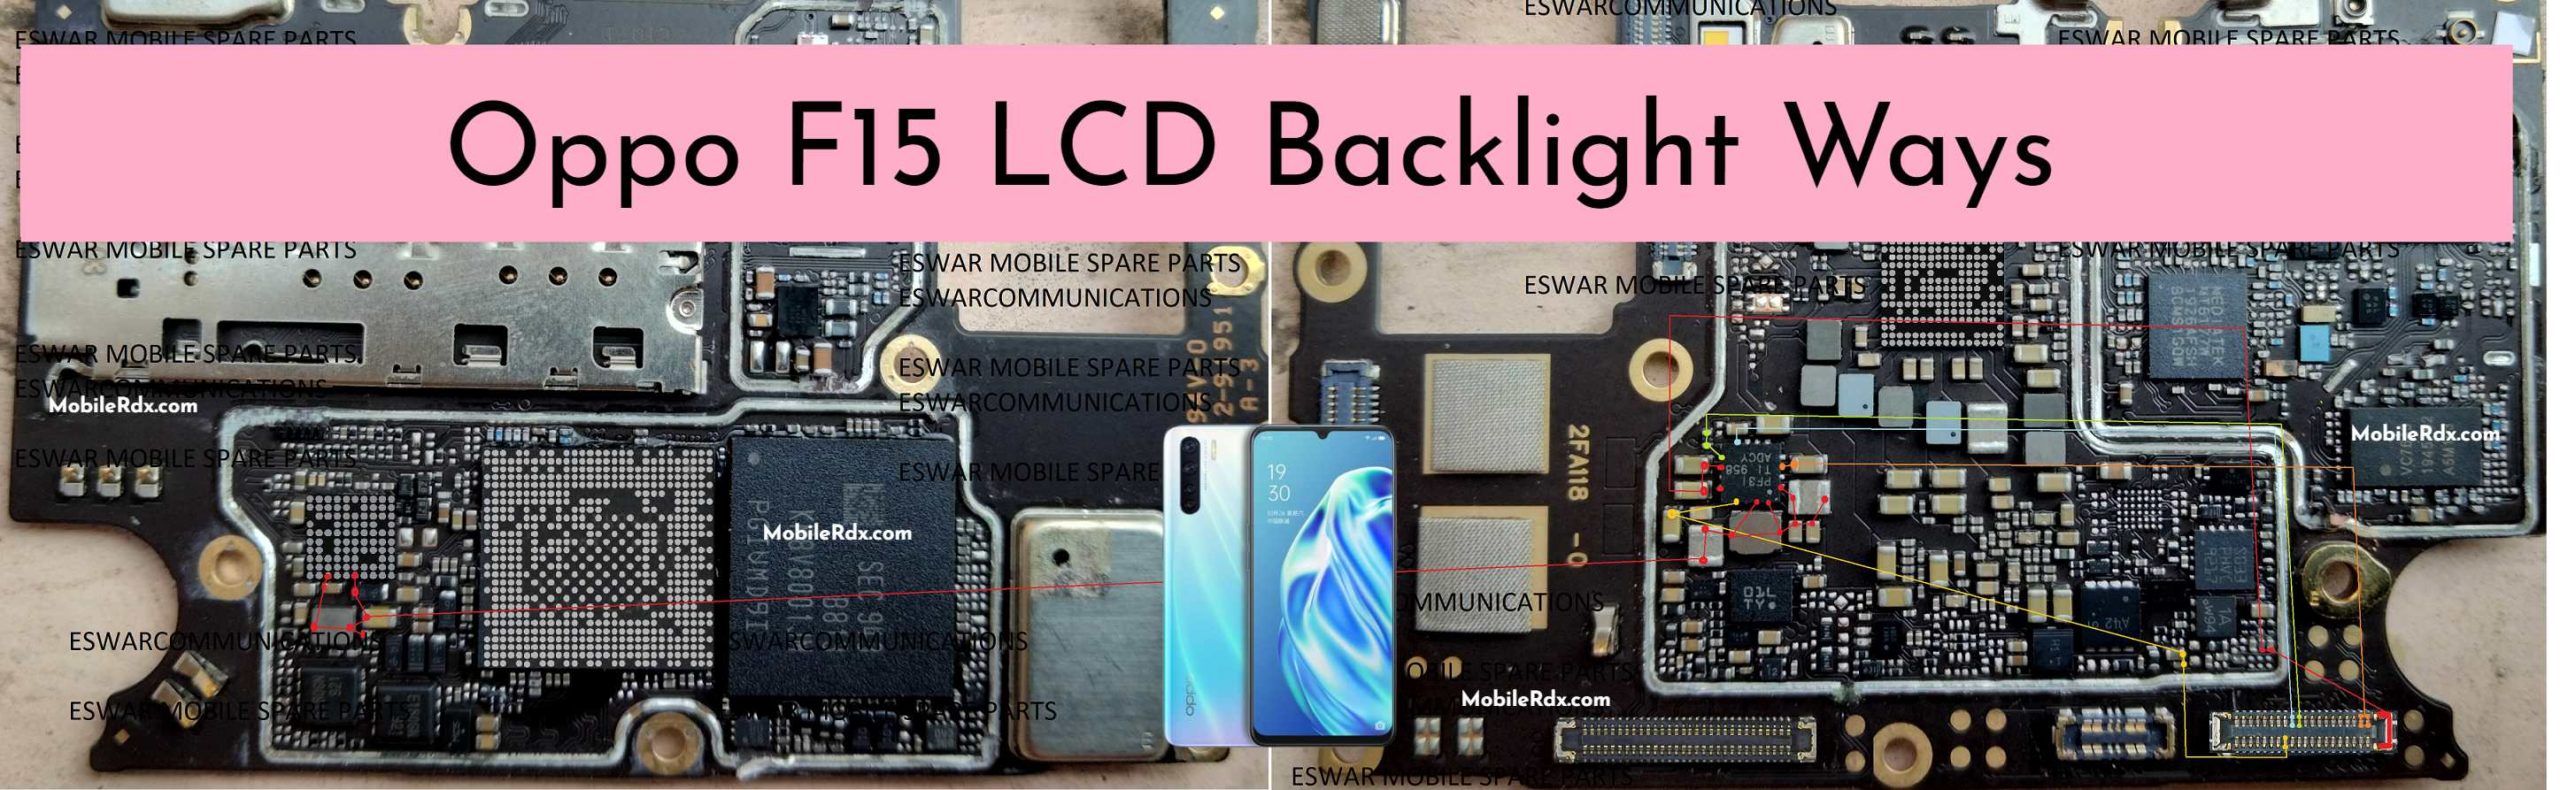 Oppo F15 Backlight Ways Repair Display Light Problem scaled